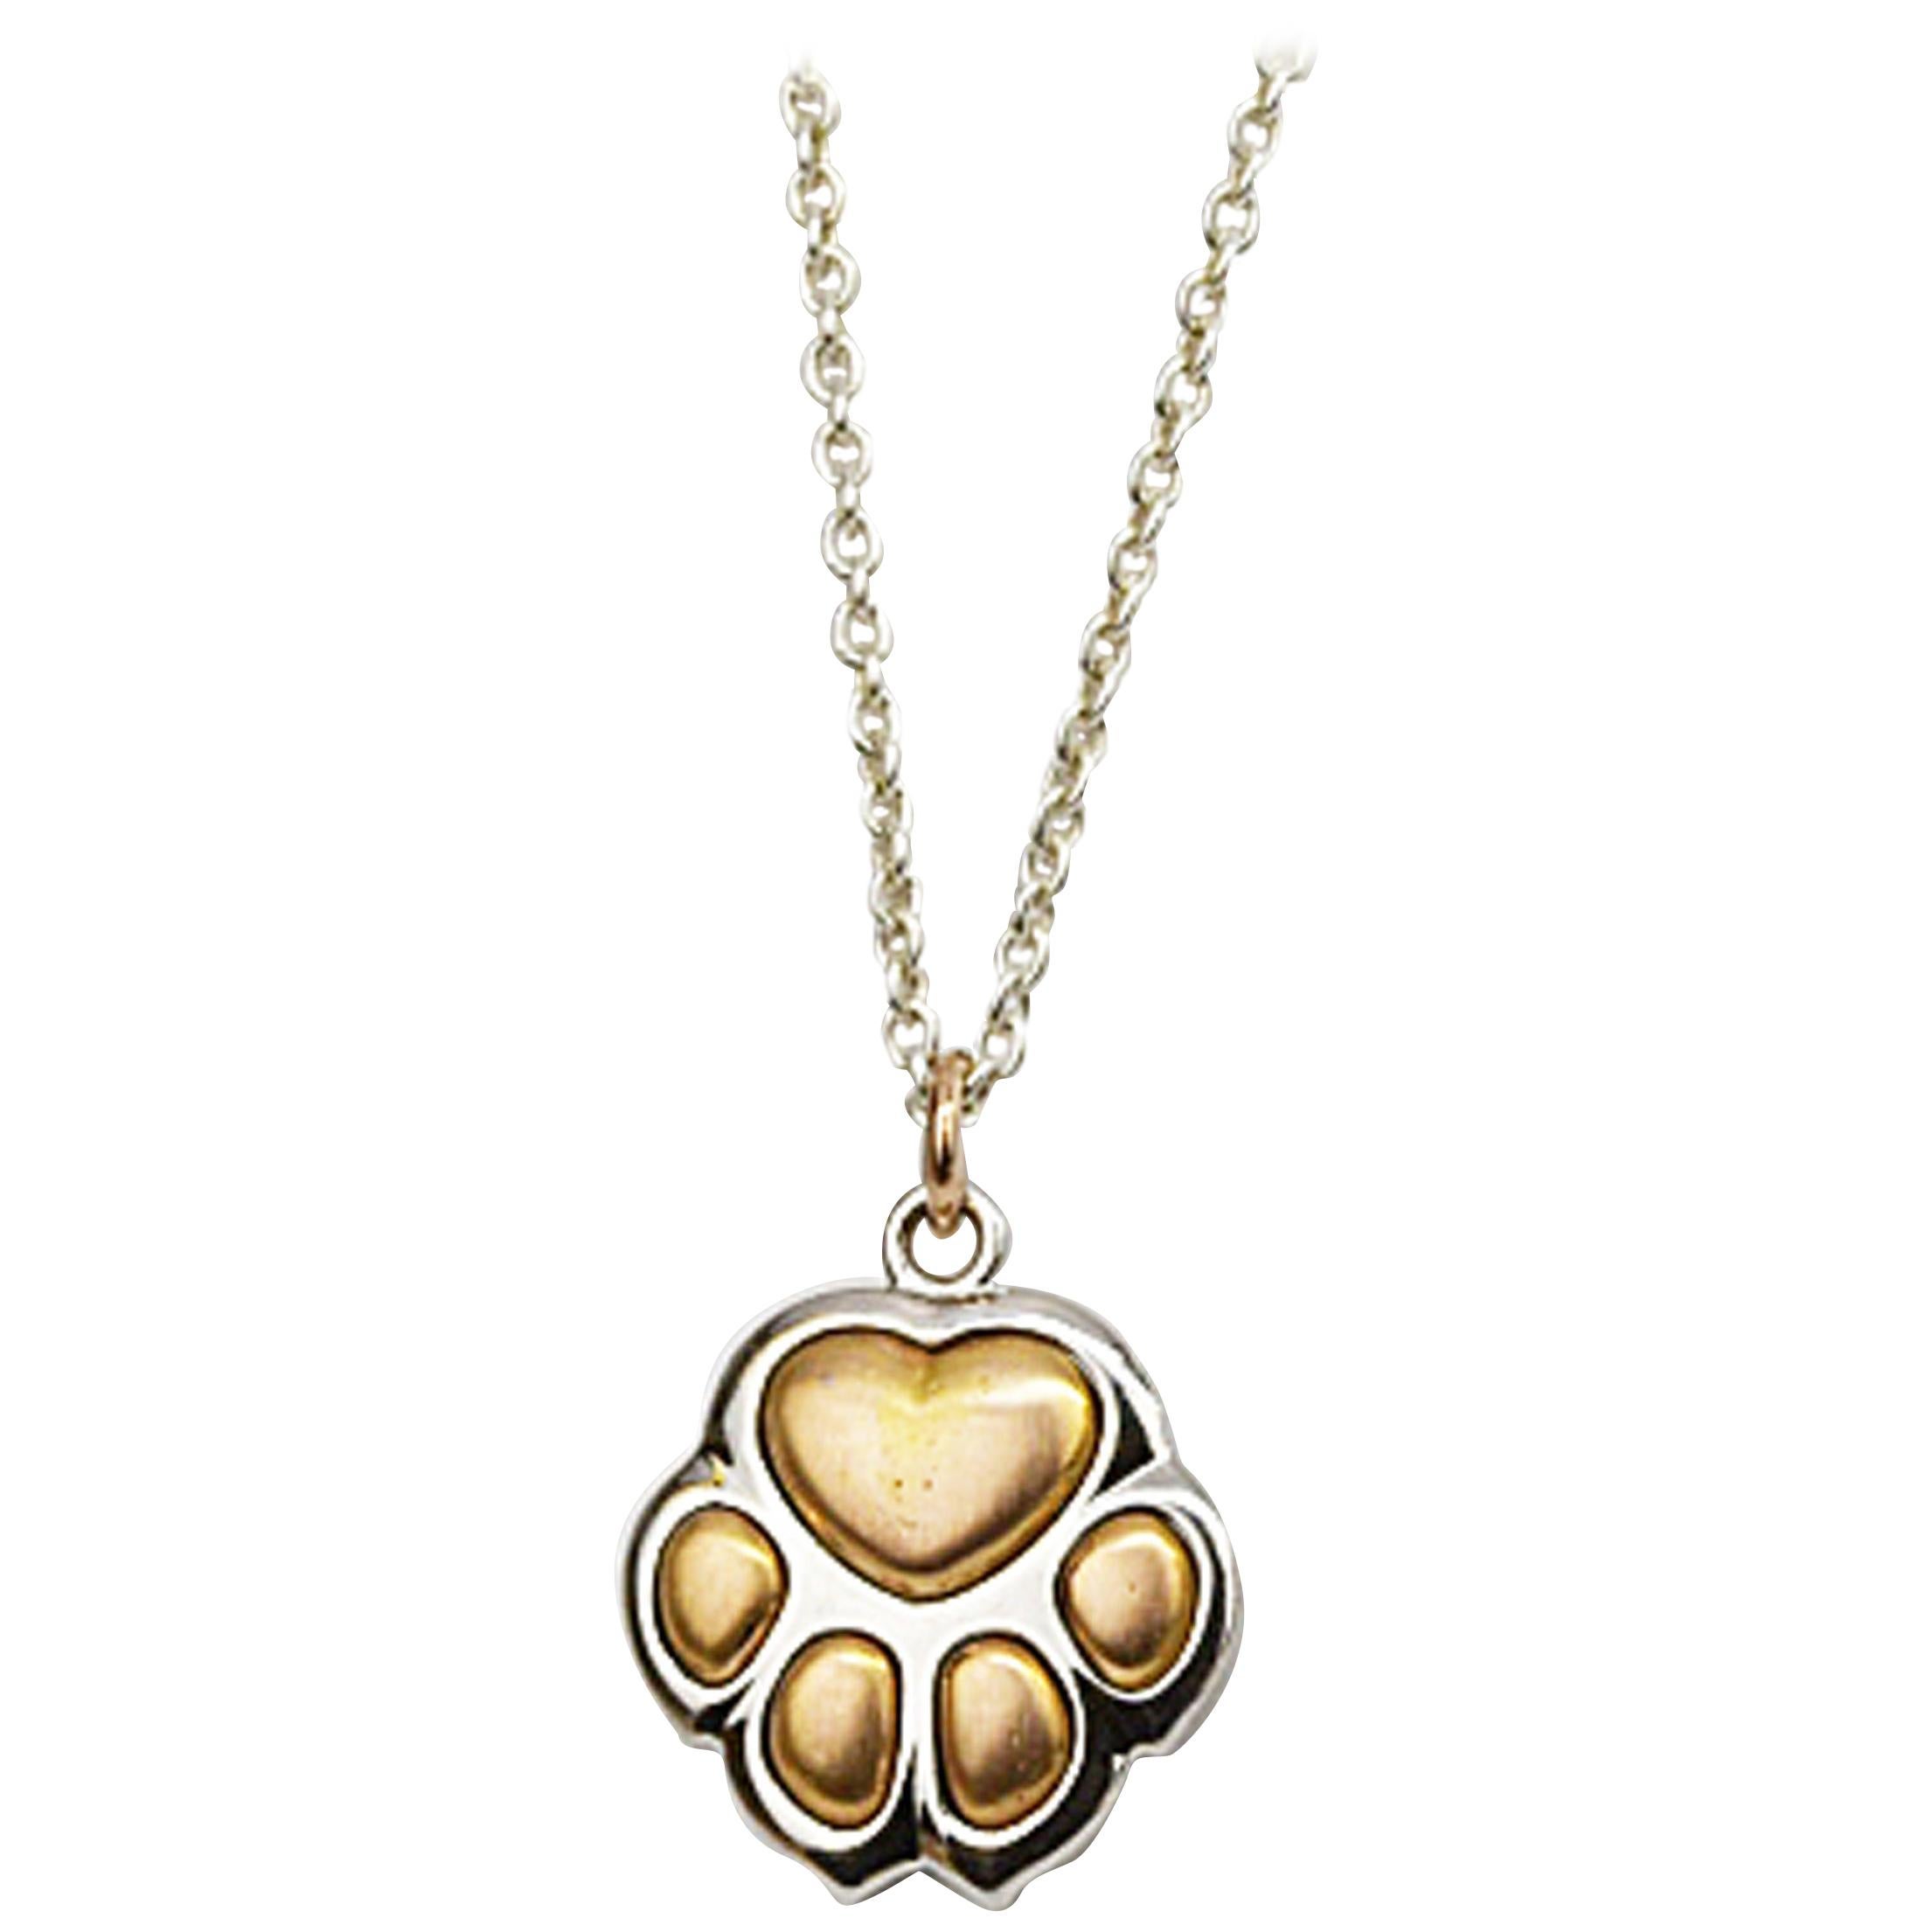 Matthew Cambery 18K White and Rose Gold Puppy Paw Pendant with Diamond Set Chain